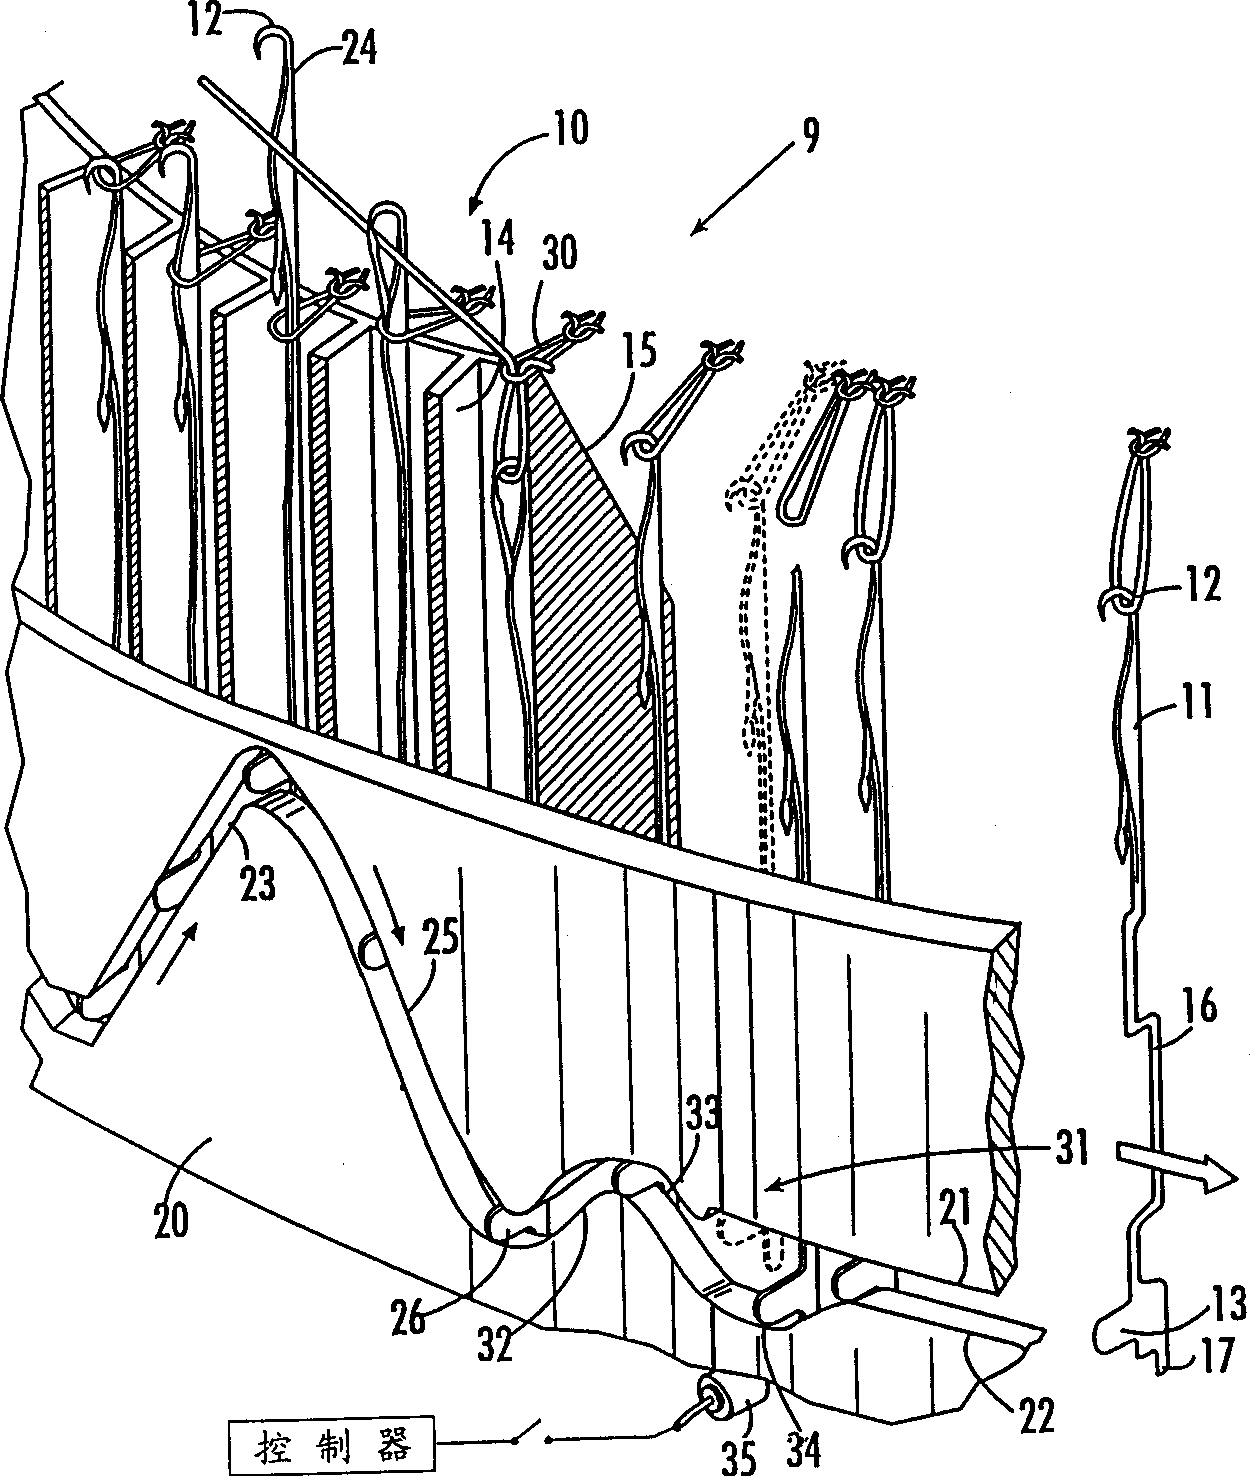 Improved apparatus and method for detecting broken pin hole and loom used together